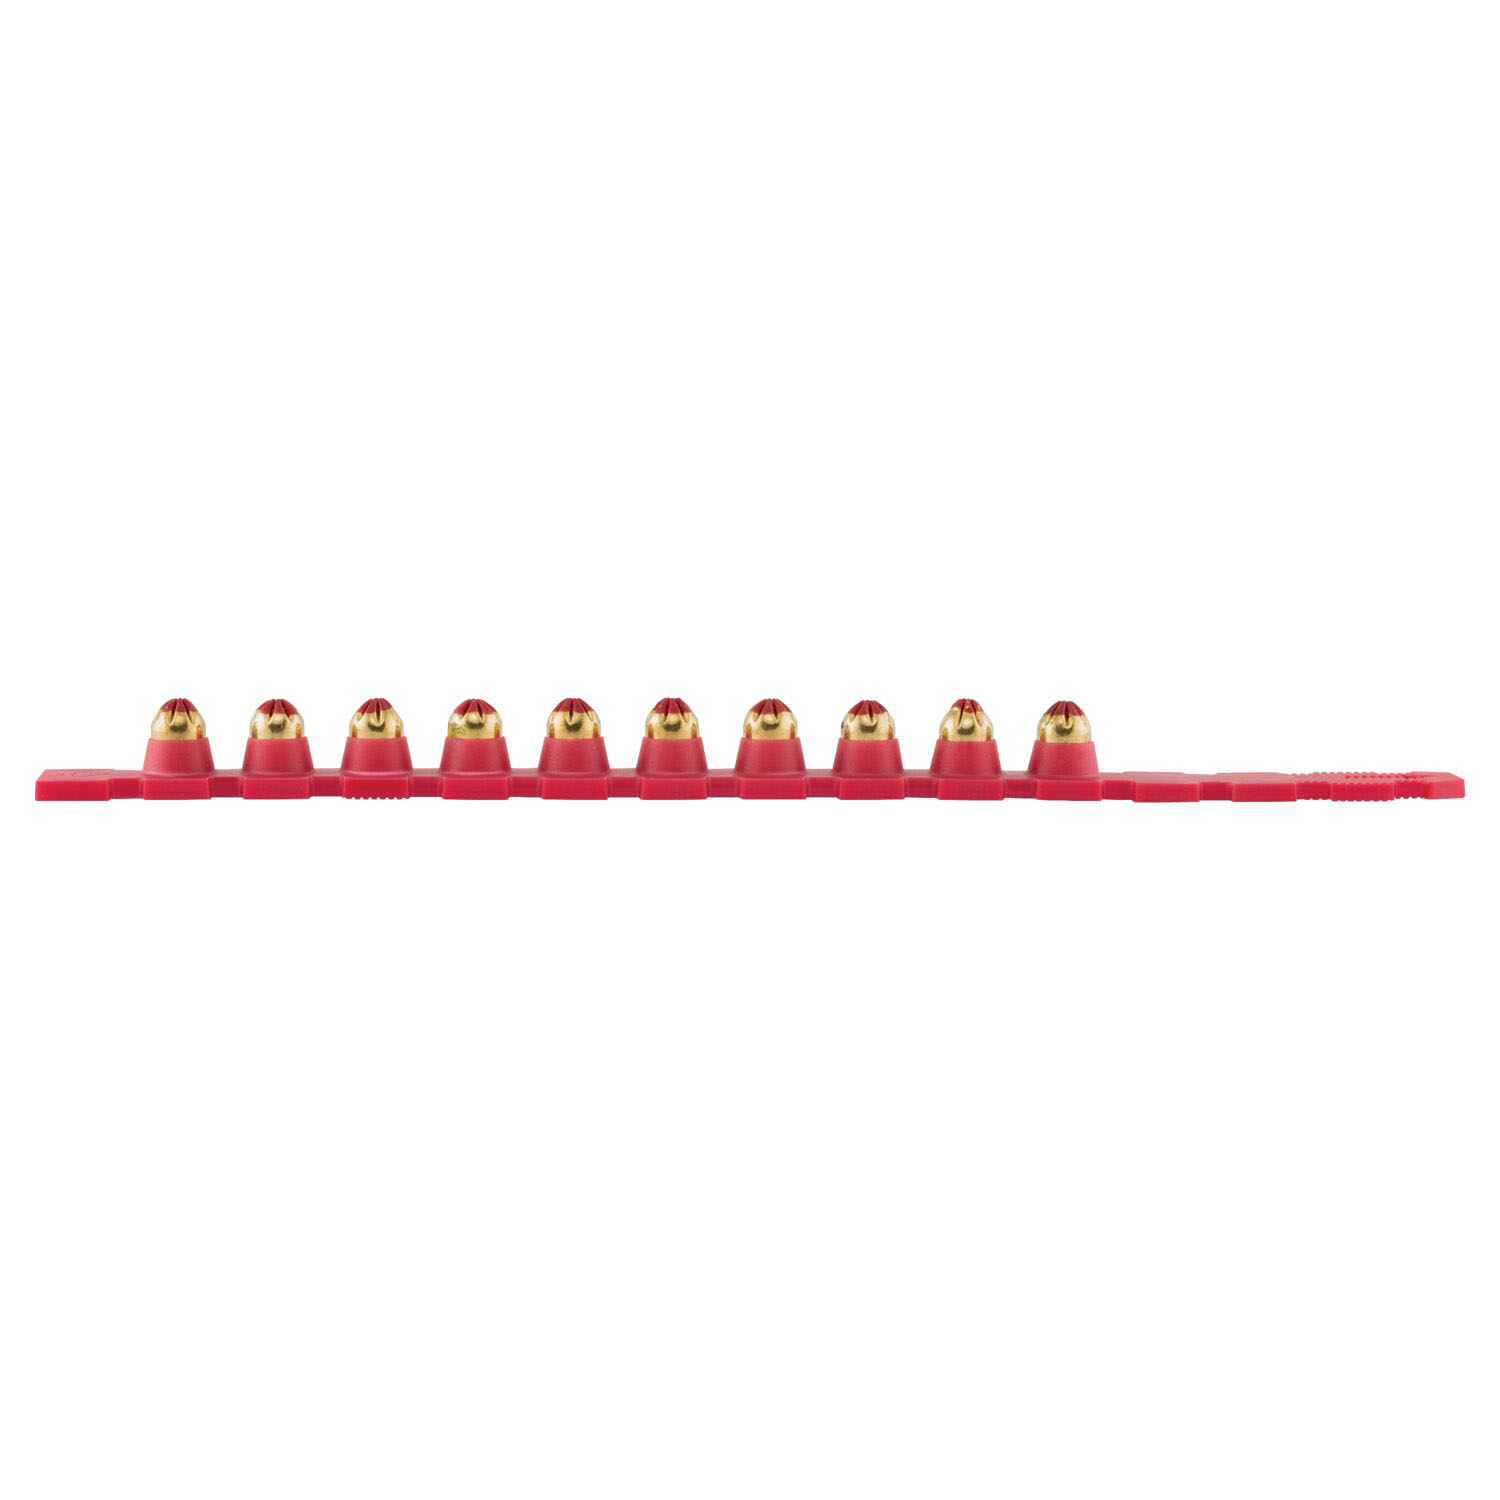 0.27 CALIBER SHORT SAFETY STRIP LOAD RED BOOSTERS 100 BOX